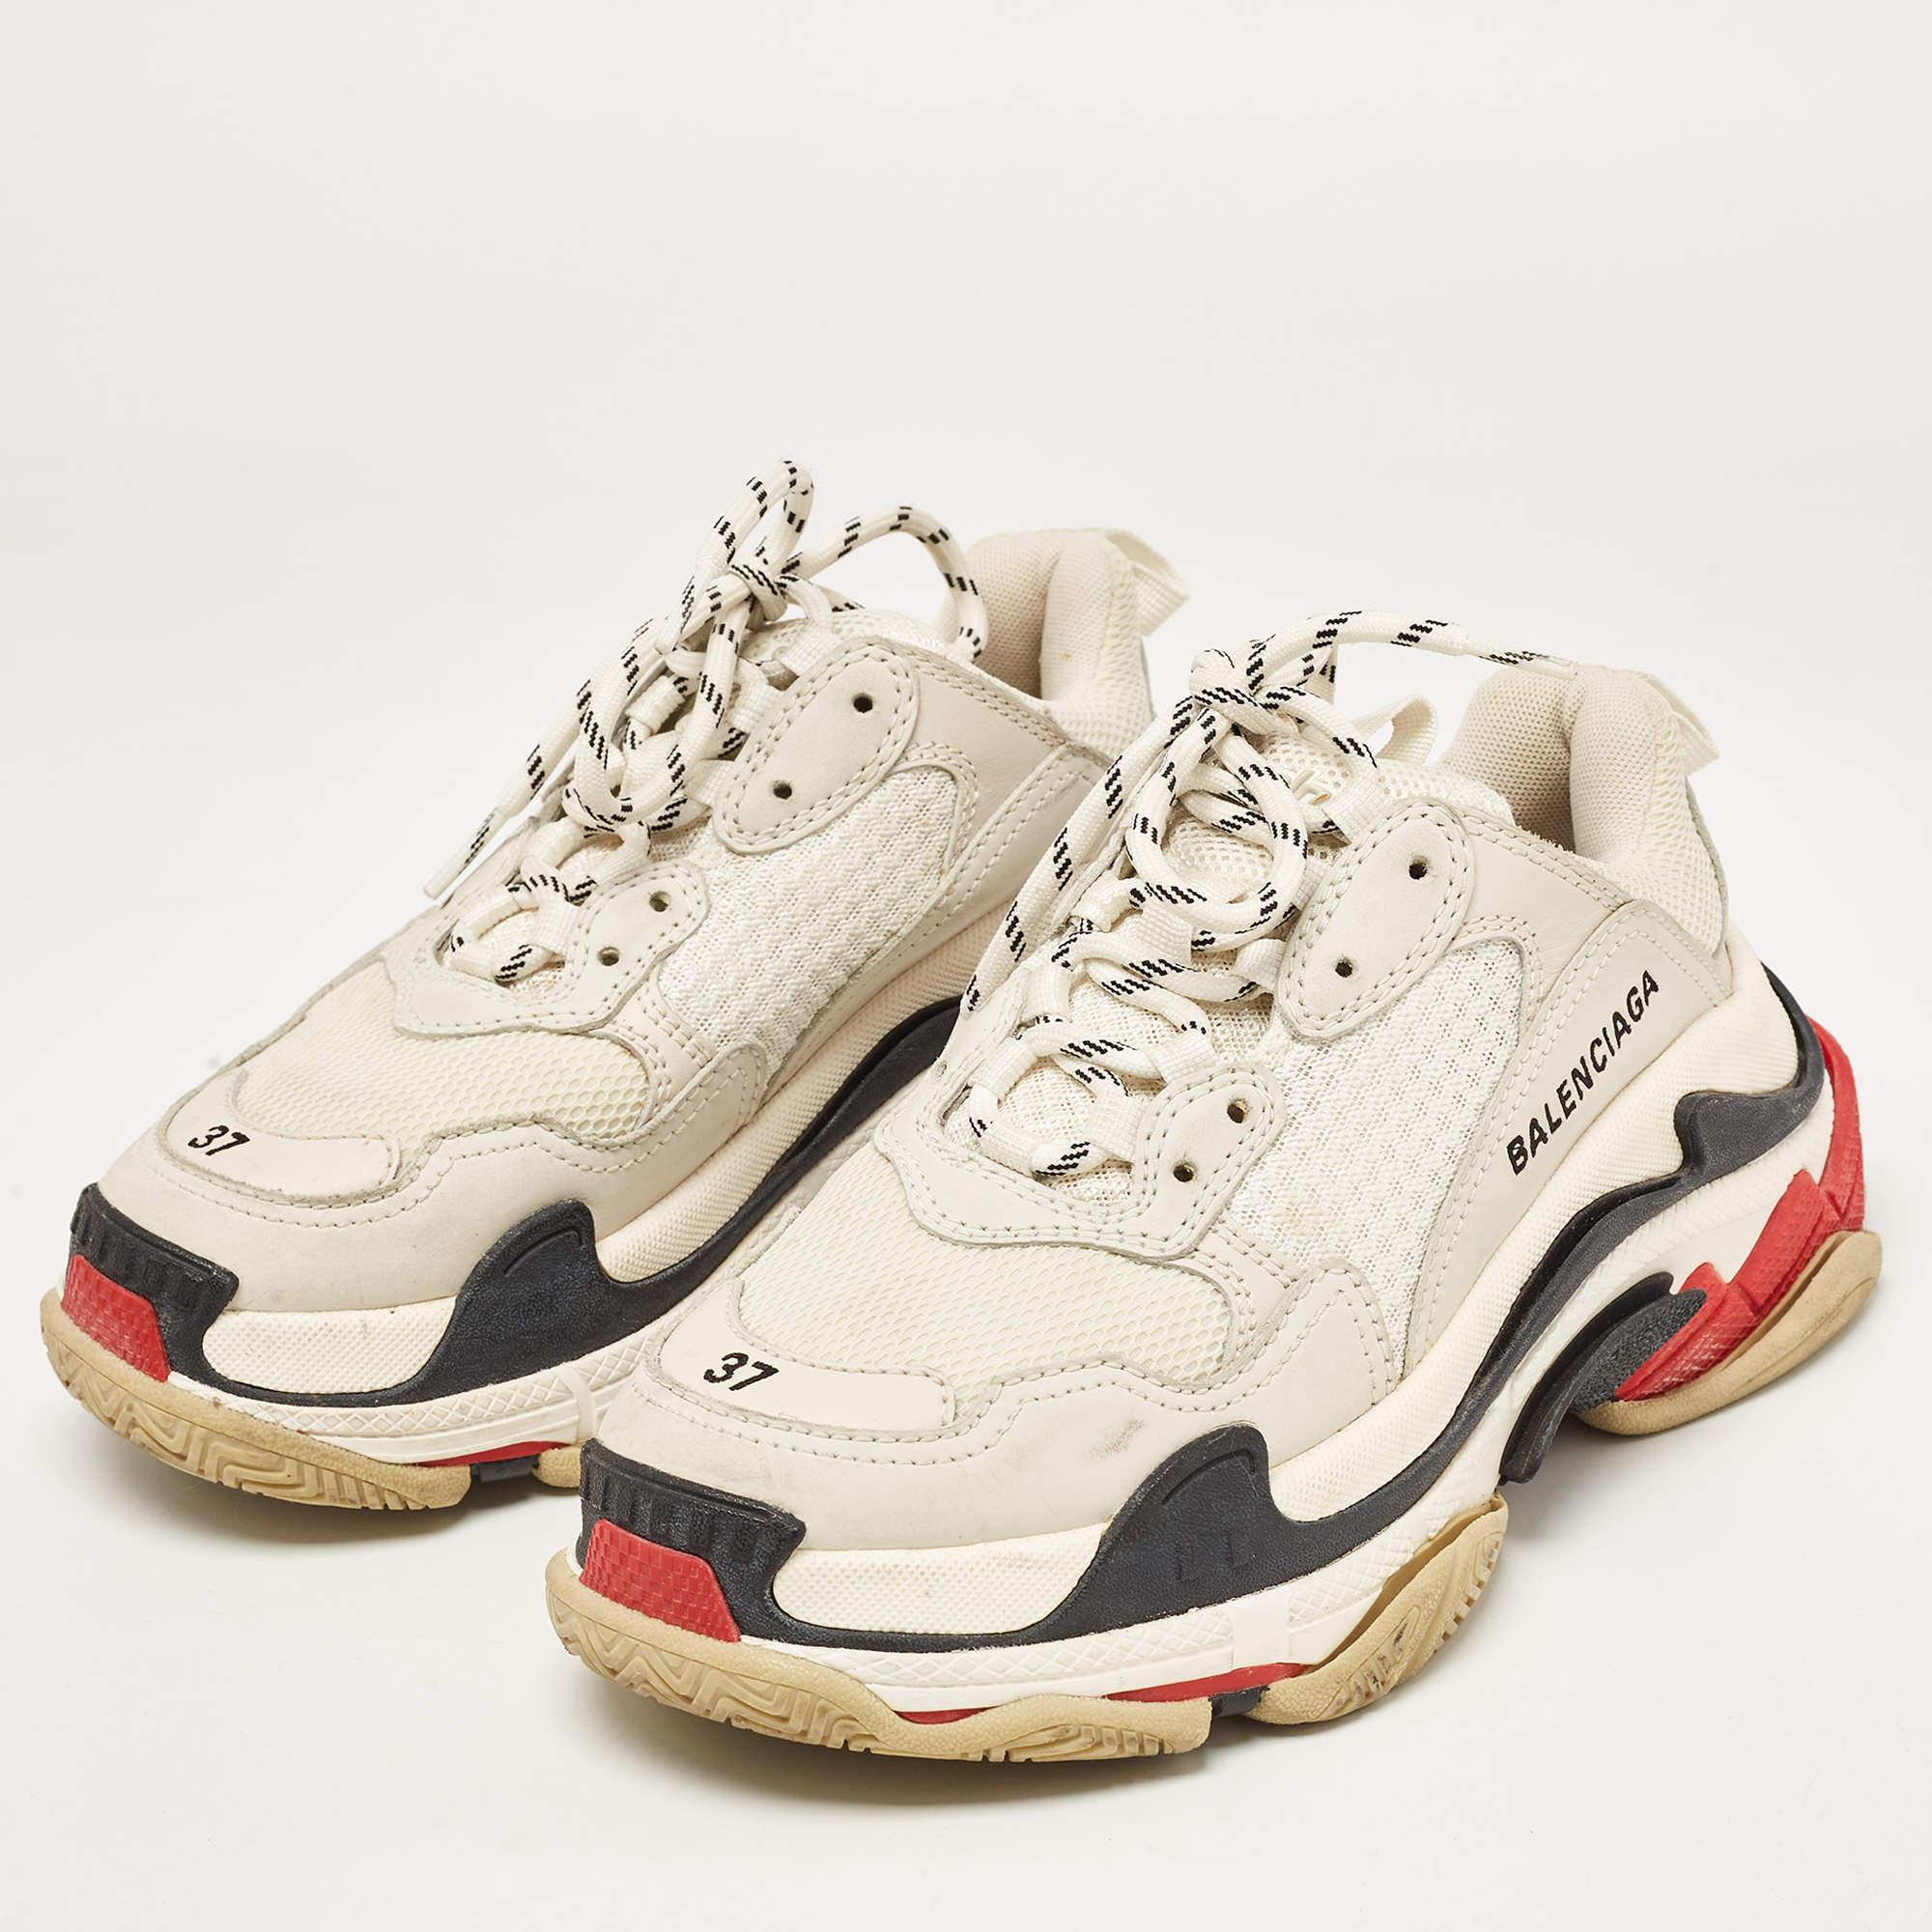 Coming in a classic silhouette, these Balenciaga sneakers for women are a seamless combination of luxury, comfort, and style. They are finished with signature details and comfortable insoles.

